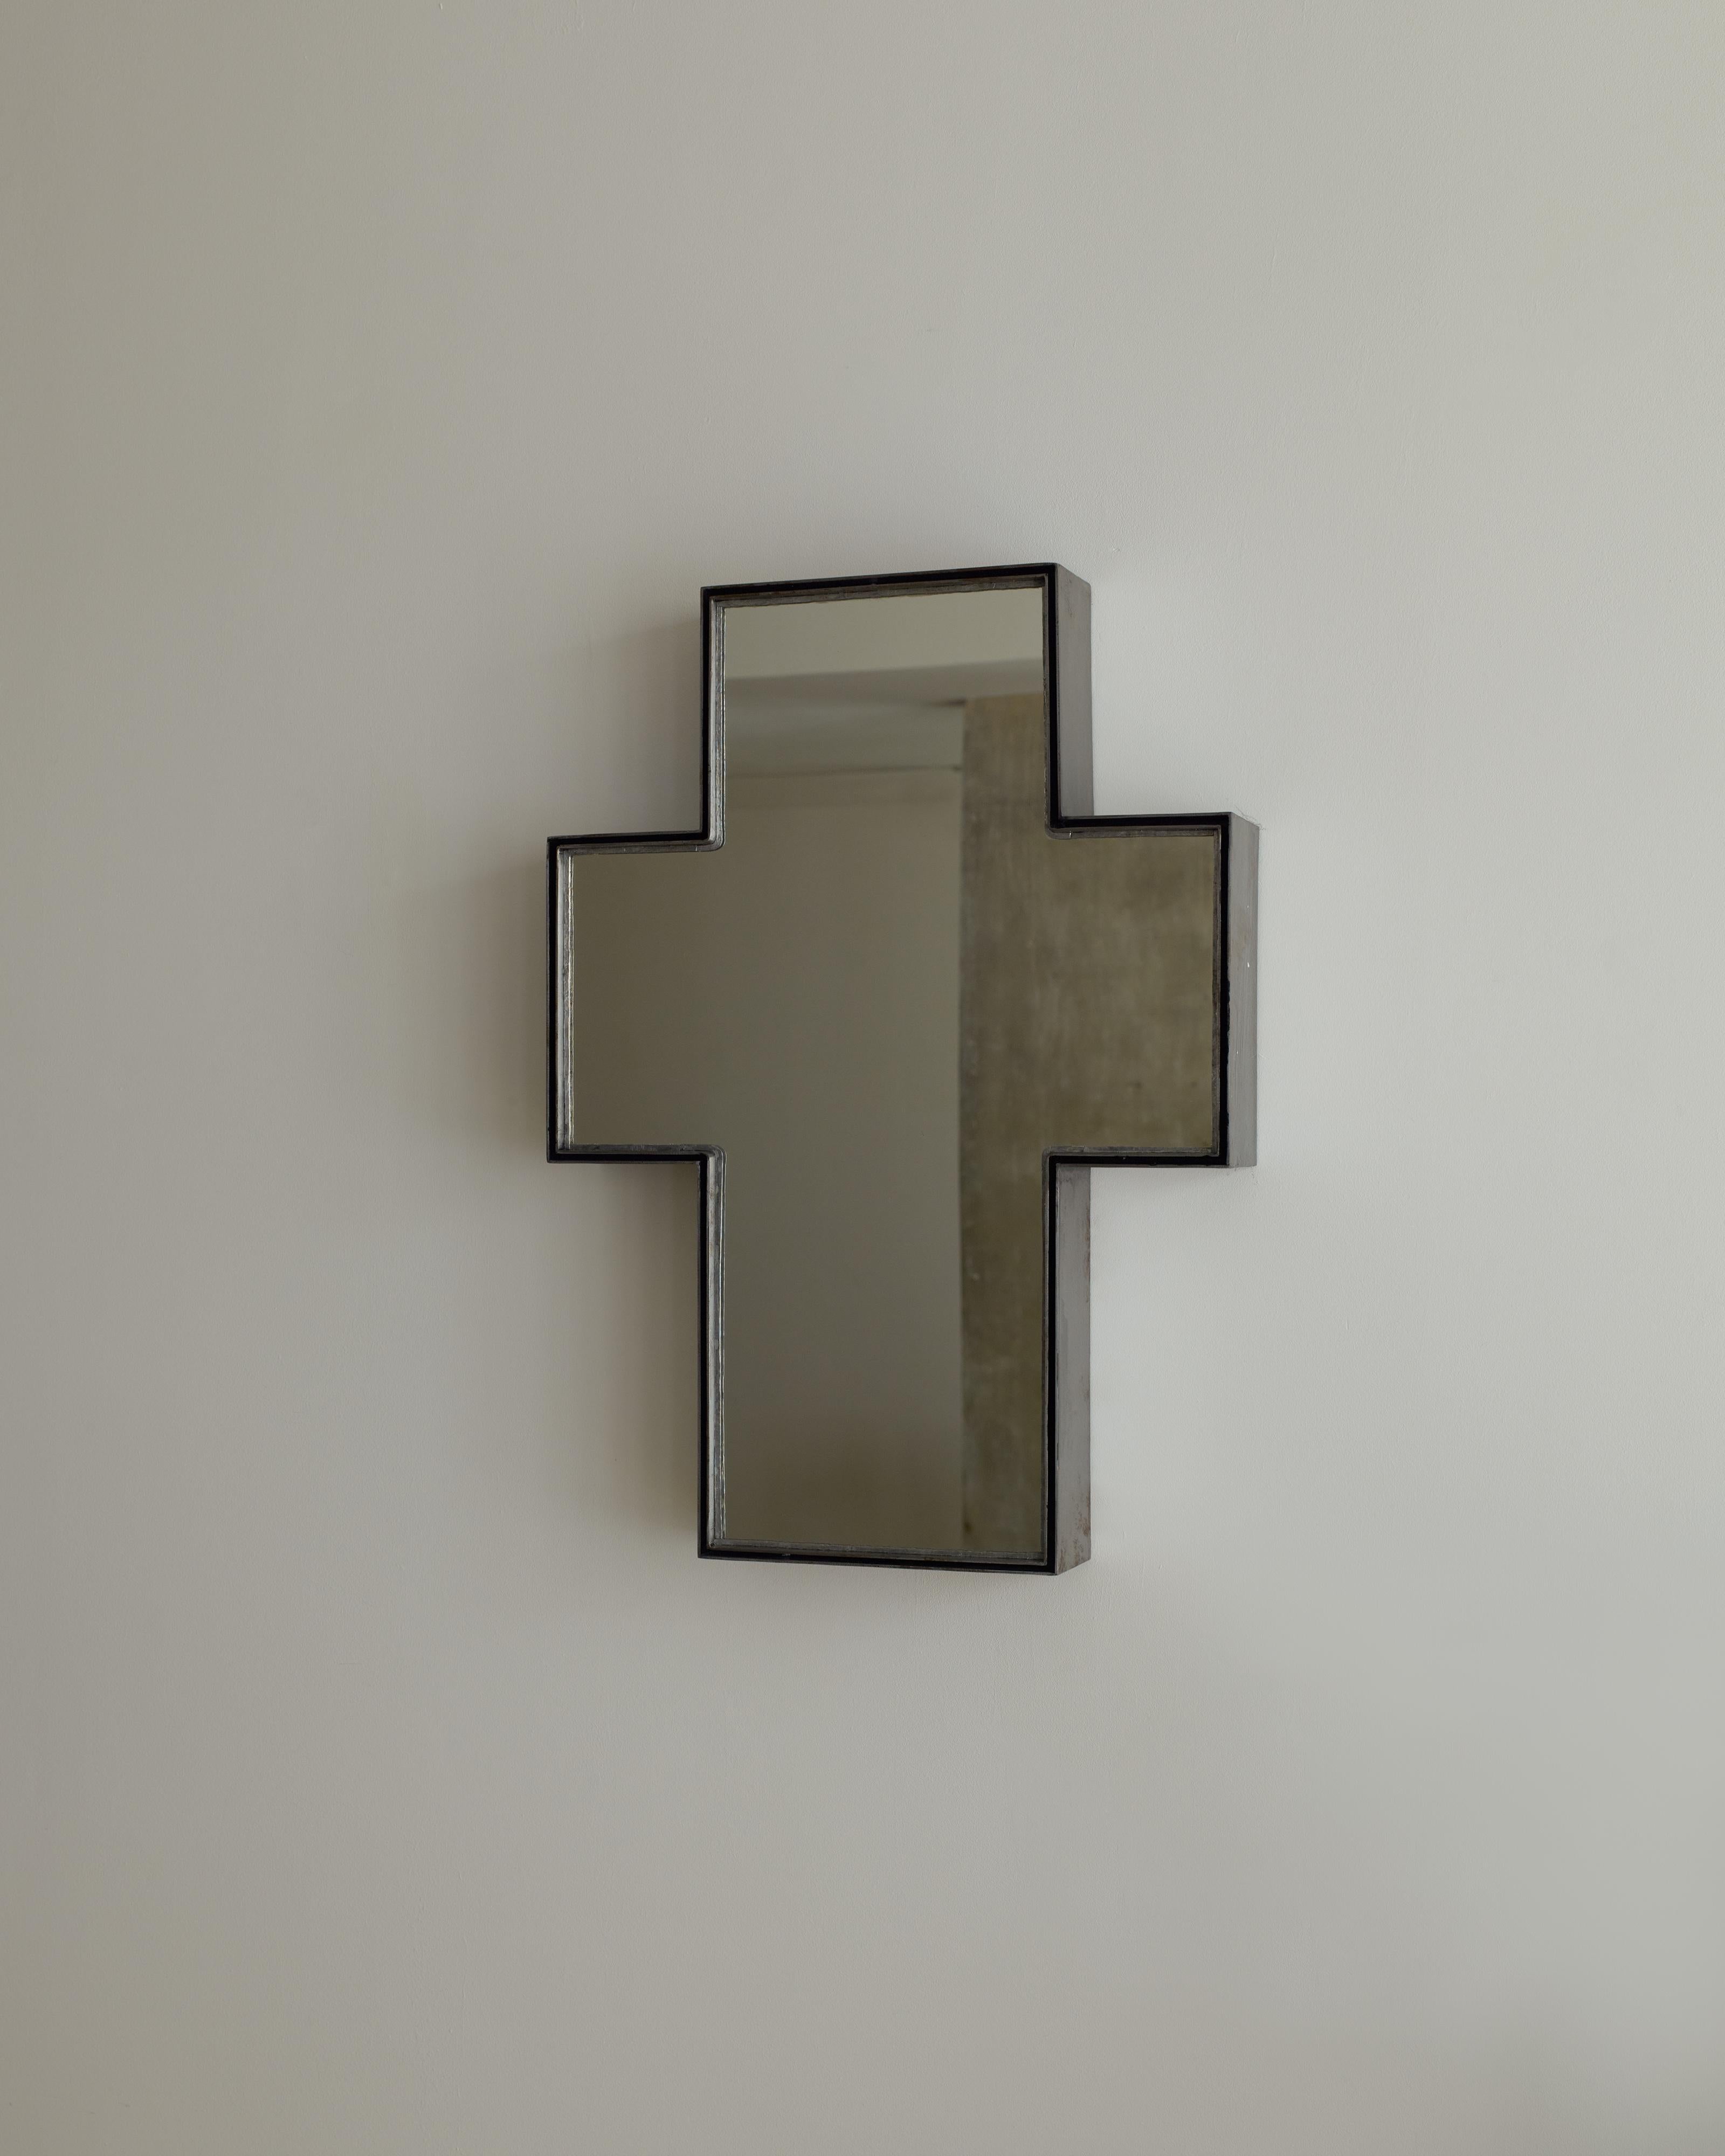 'Talisman Mirror No. 3' by Rooms Studio is an iron-framed wall mirror in the form of a Latin cross (Crux Immissa). Dubbed 